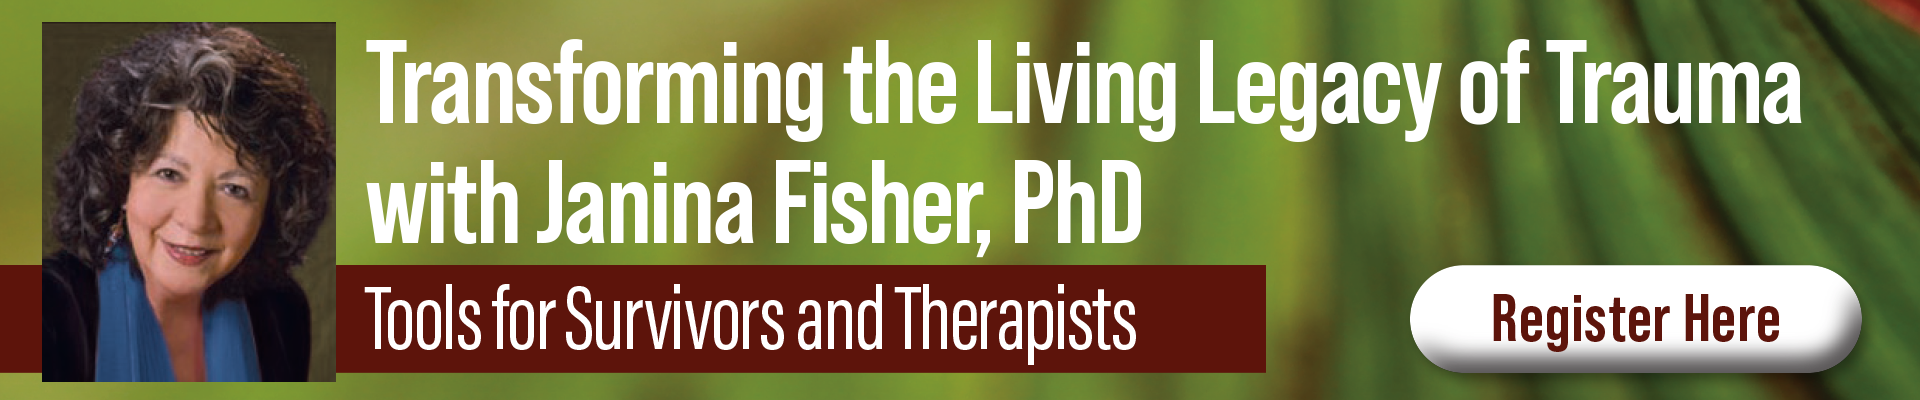 Transforming the Living Legacy of Trauma with Janina Fisher, PhD: Tools for Survivors and Therapists